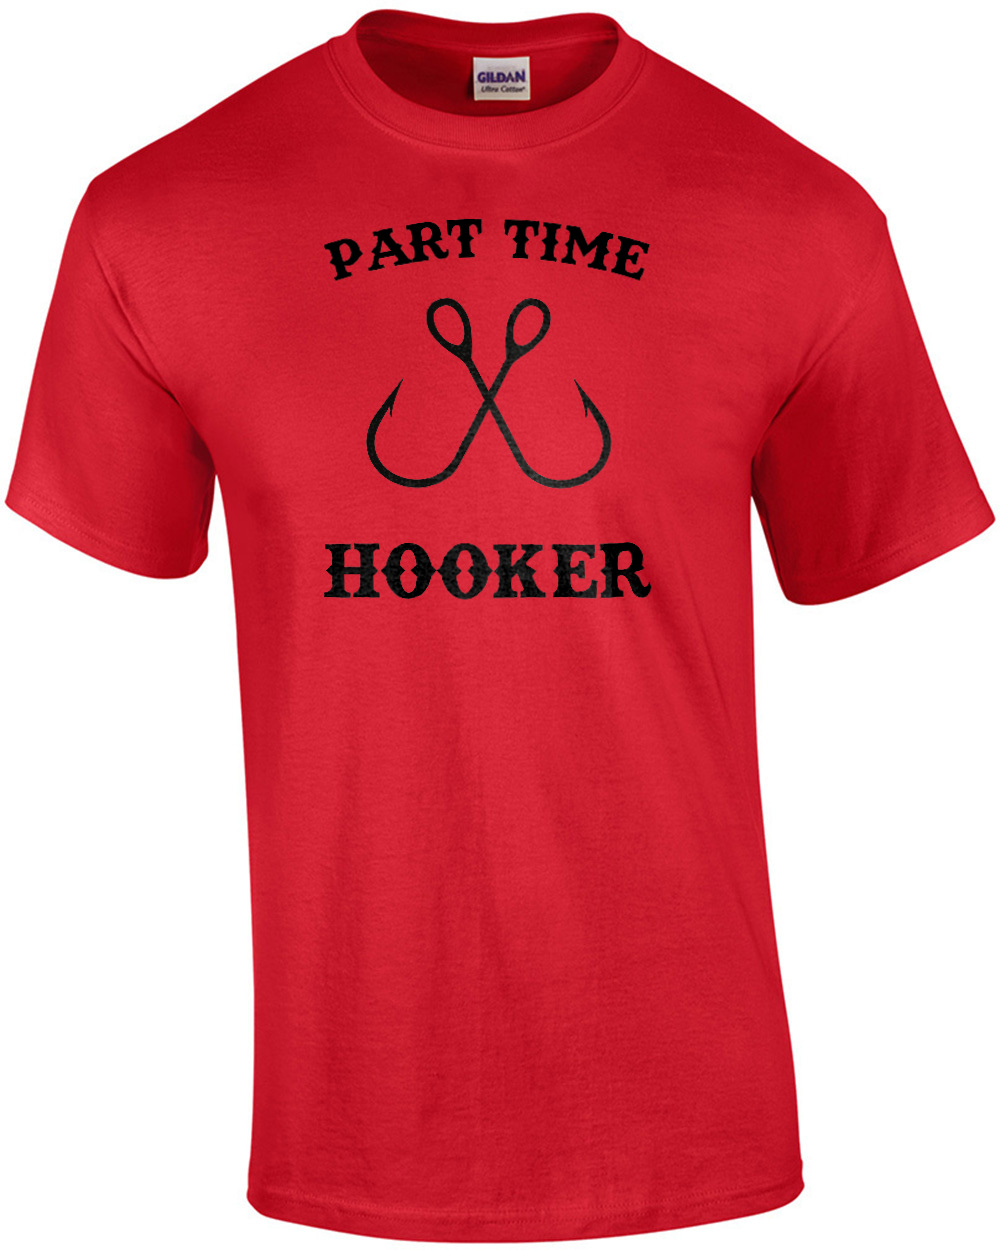 Part Time Hooker T-Shirts for Sale